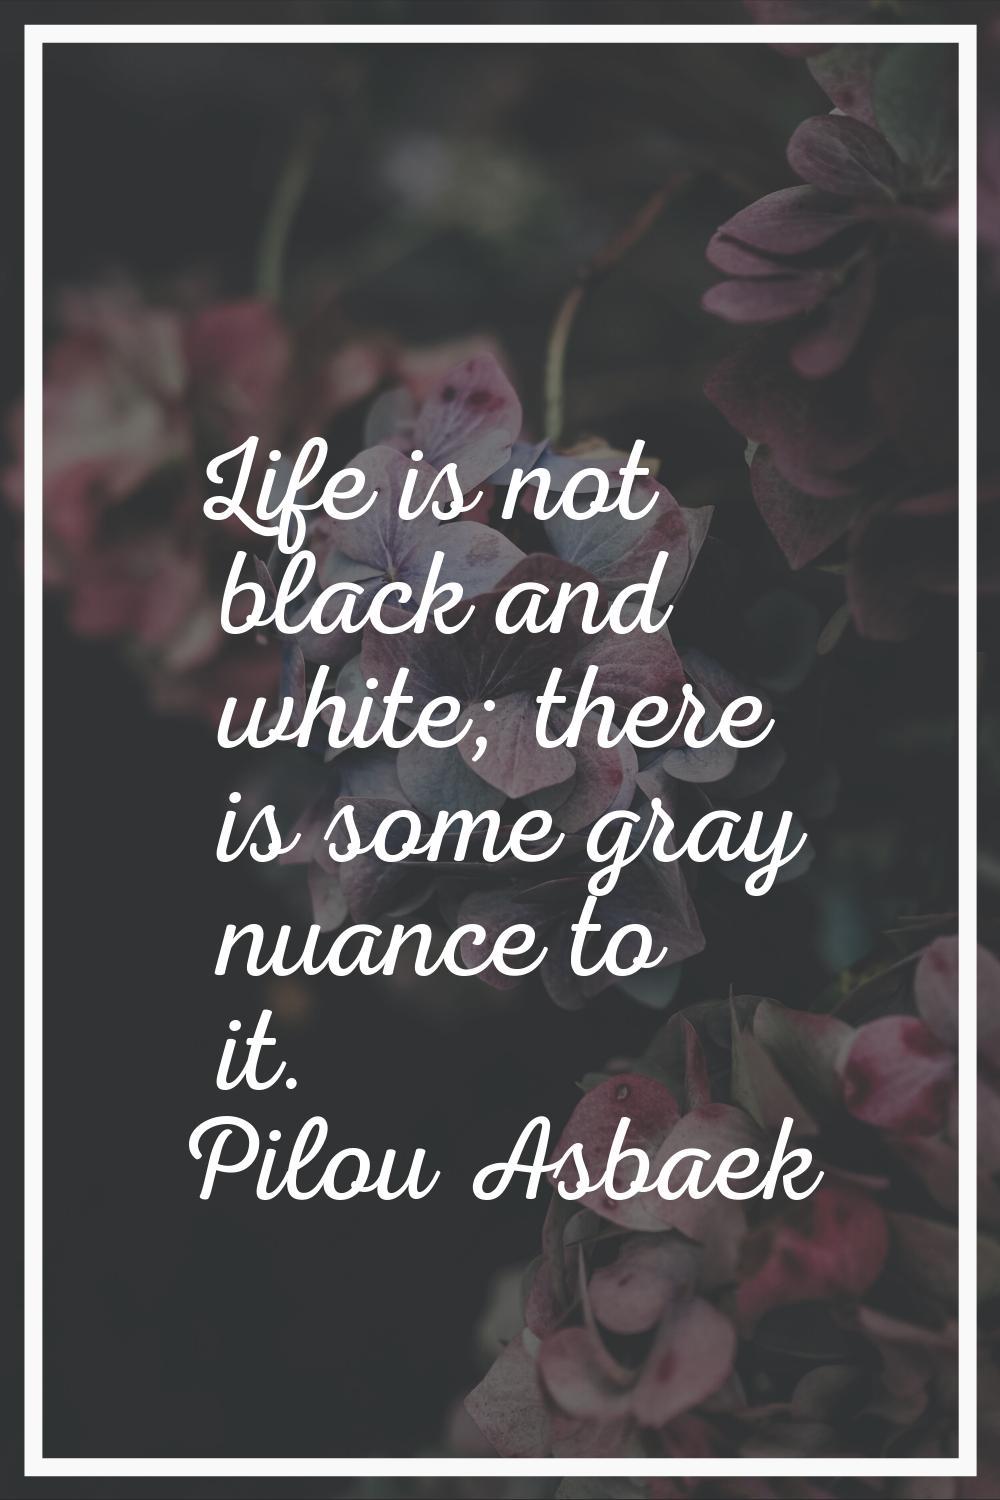 Life is not black and white; there is some gray nuance to it.